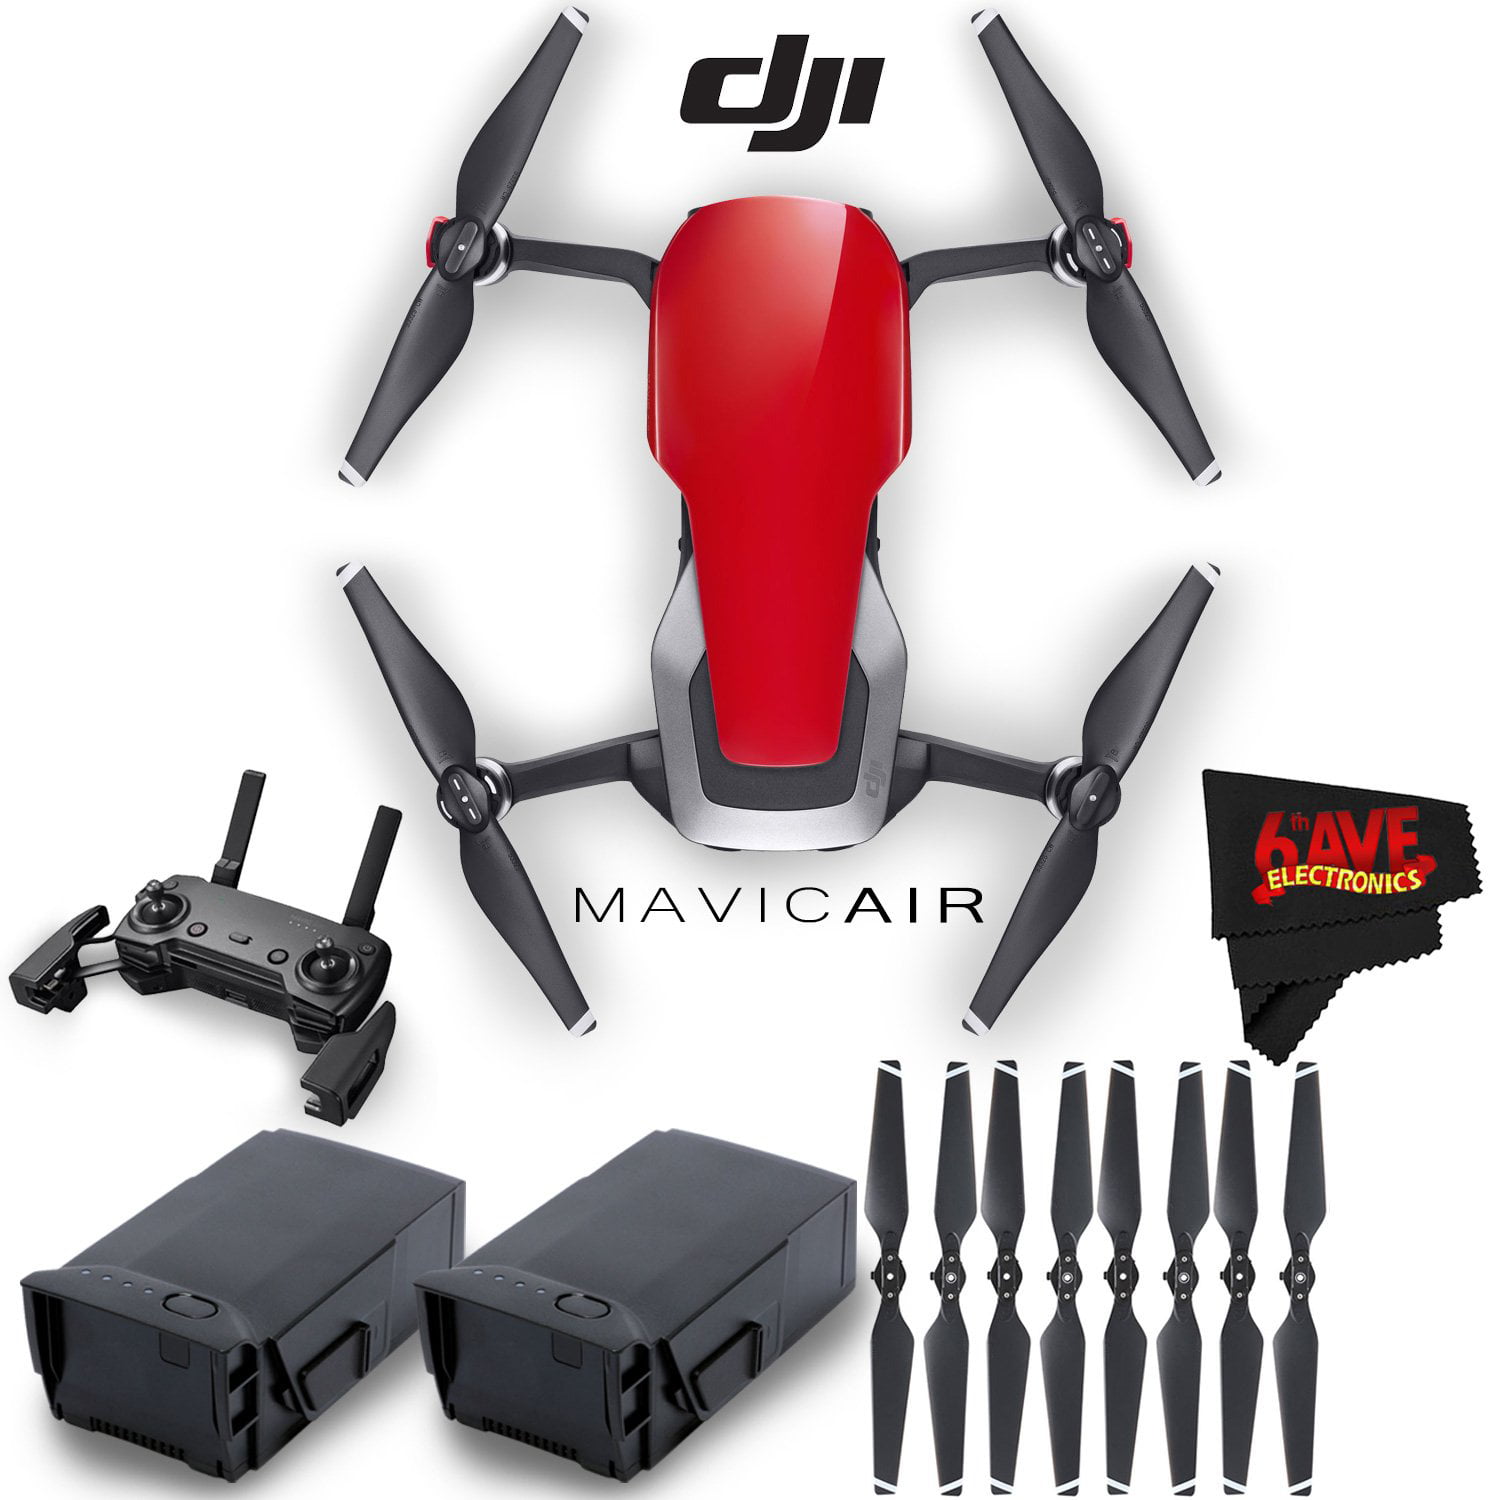 DJI Mavic Air Quadcopter Fly More Combo (Flame Red) + Extra